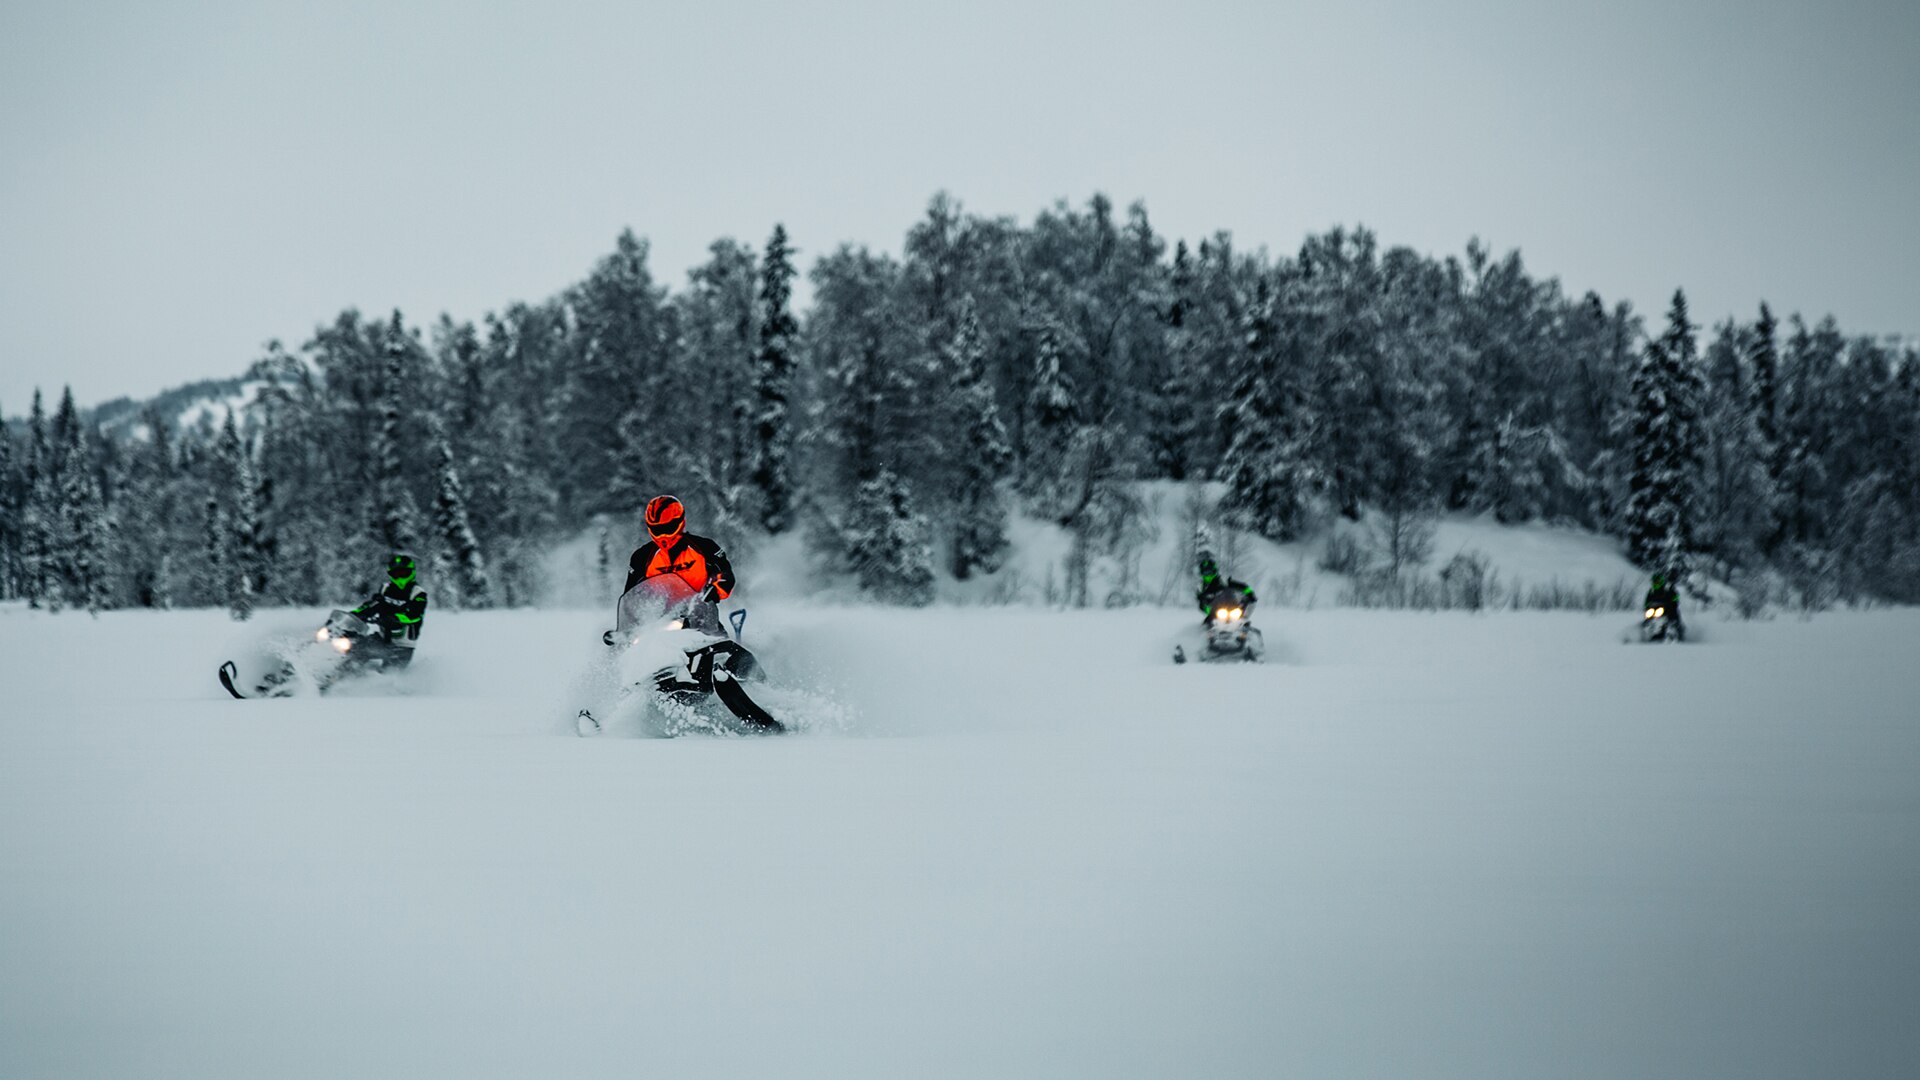 Group of four Ski-Doo riders in snowy landscape